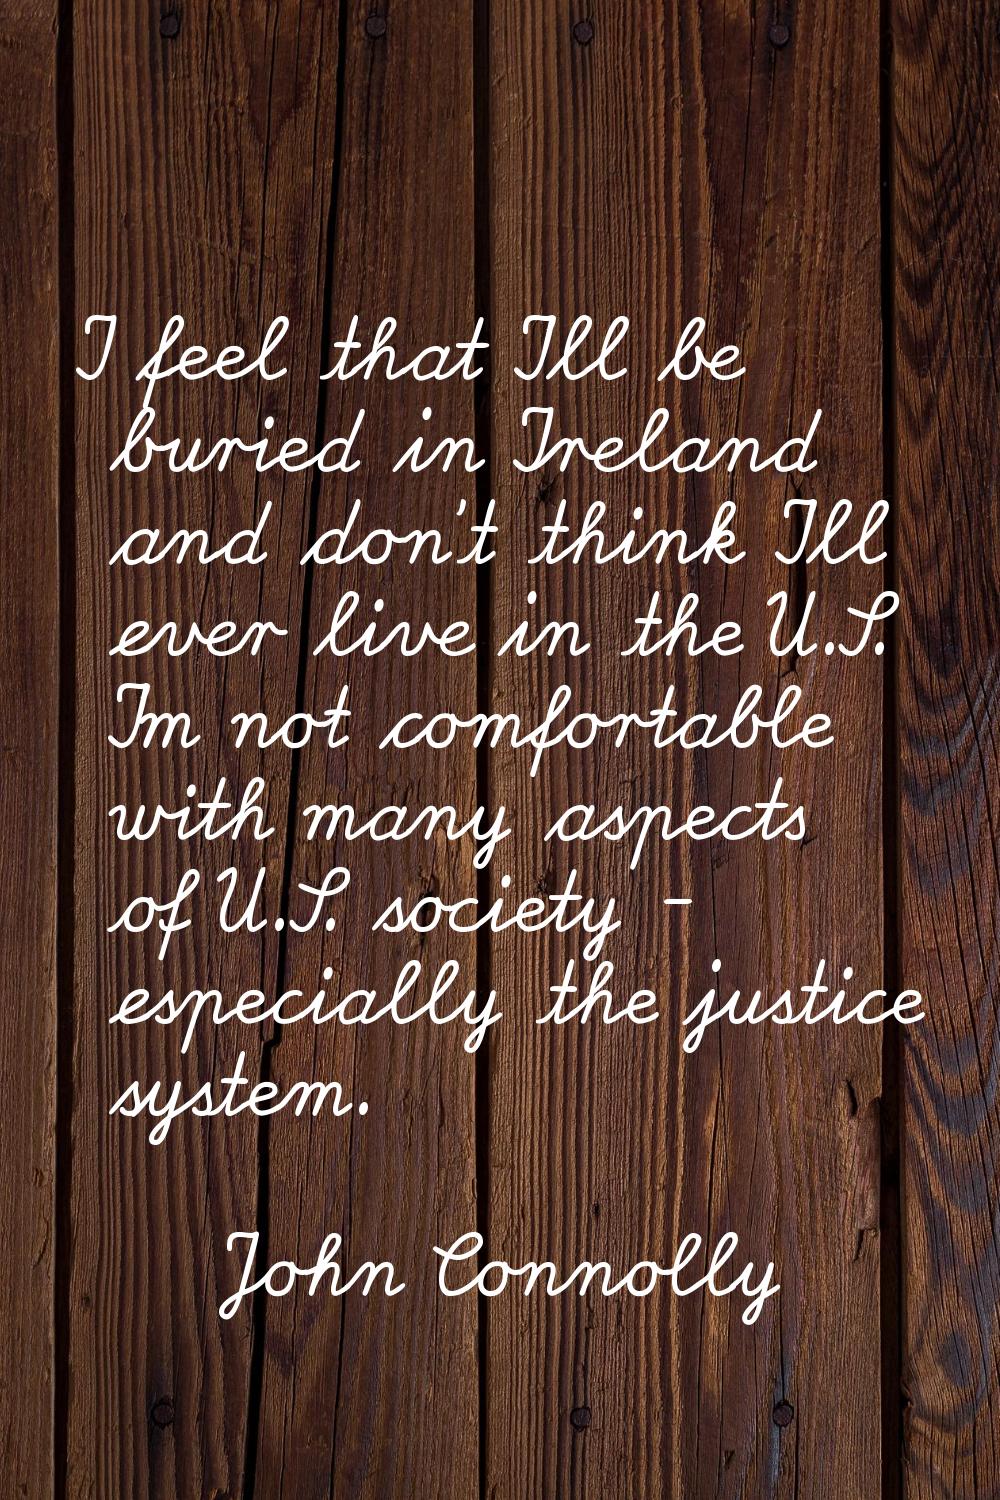 I feel that I'll be buried in Ireland and don't think I'll ever live in the U.S. I'm not comfortabl